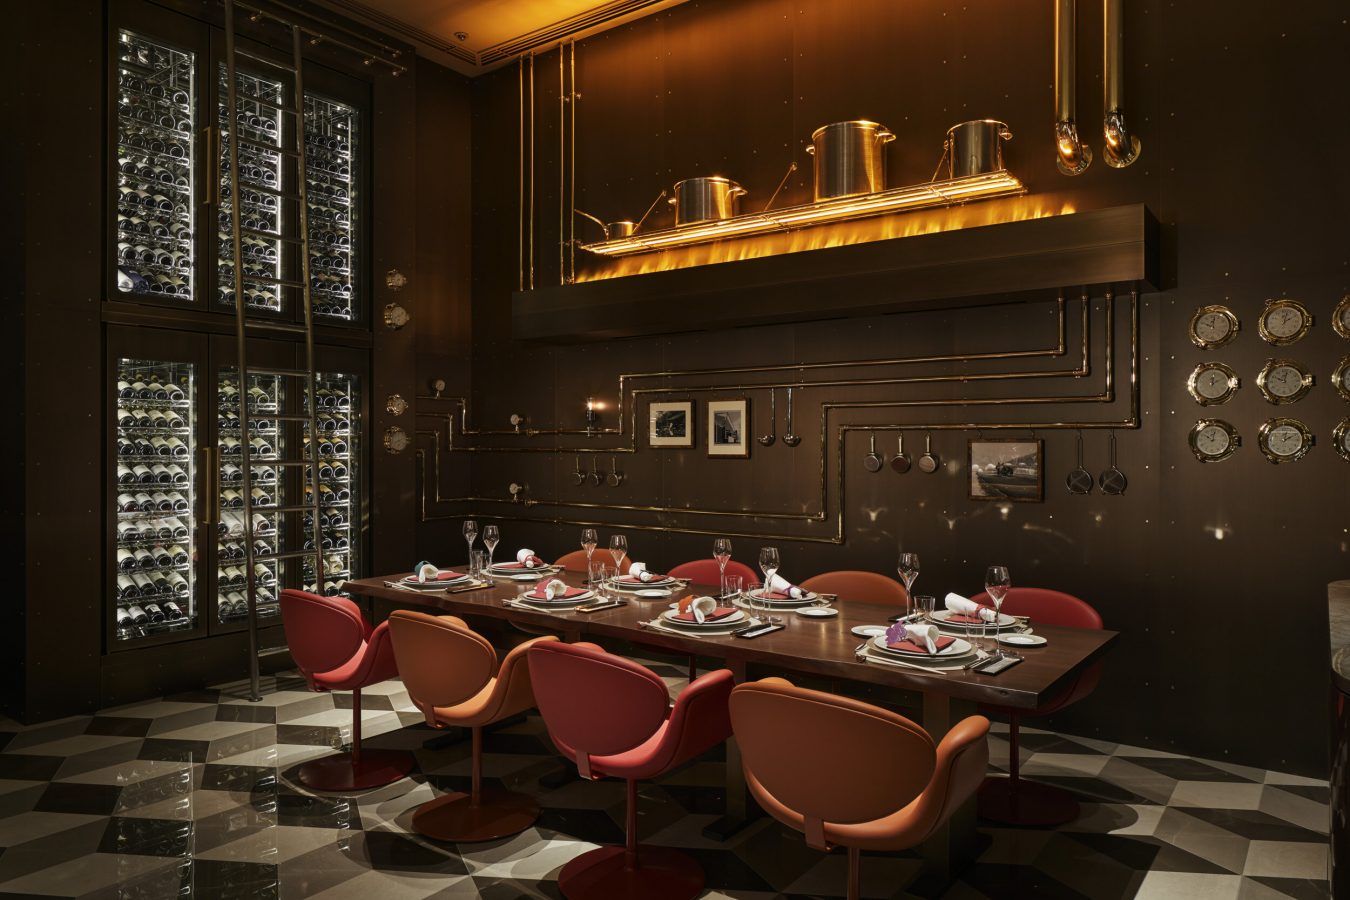 Fashion Plates: How Luxury Brands Open Restaurants All Over the World